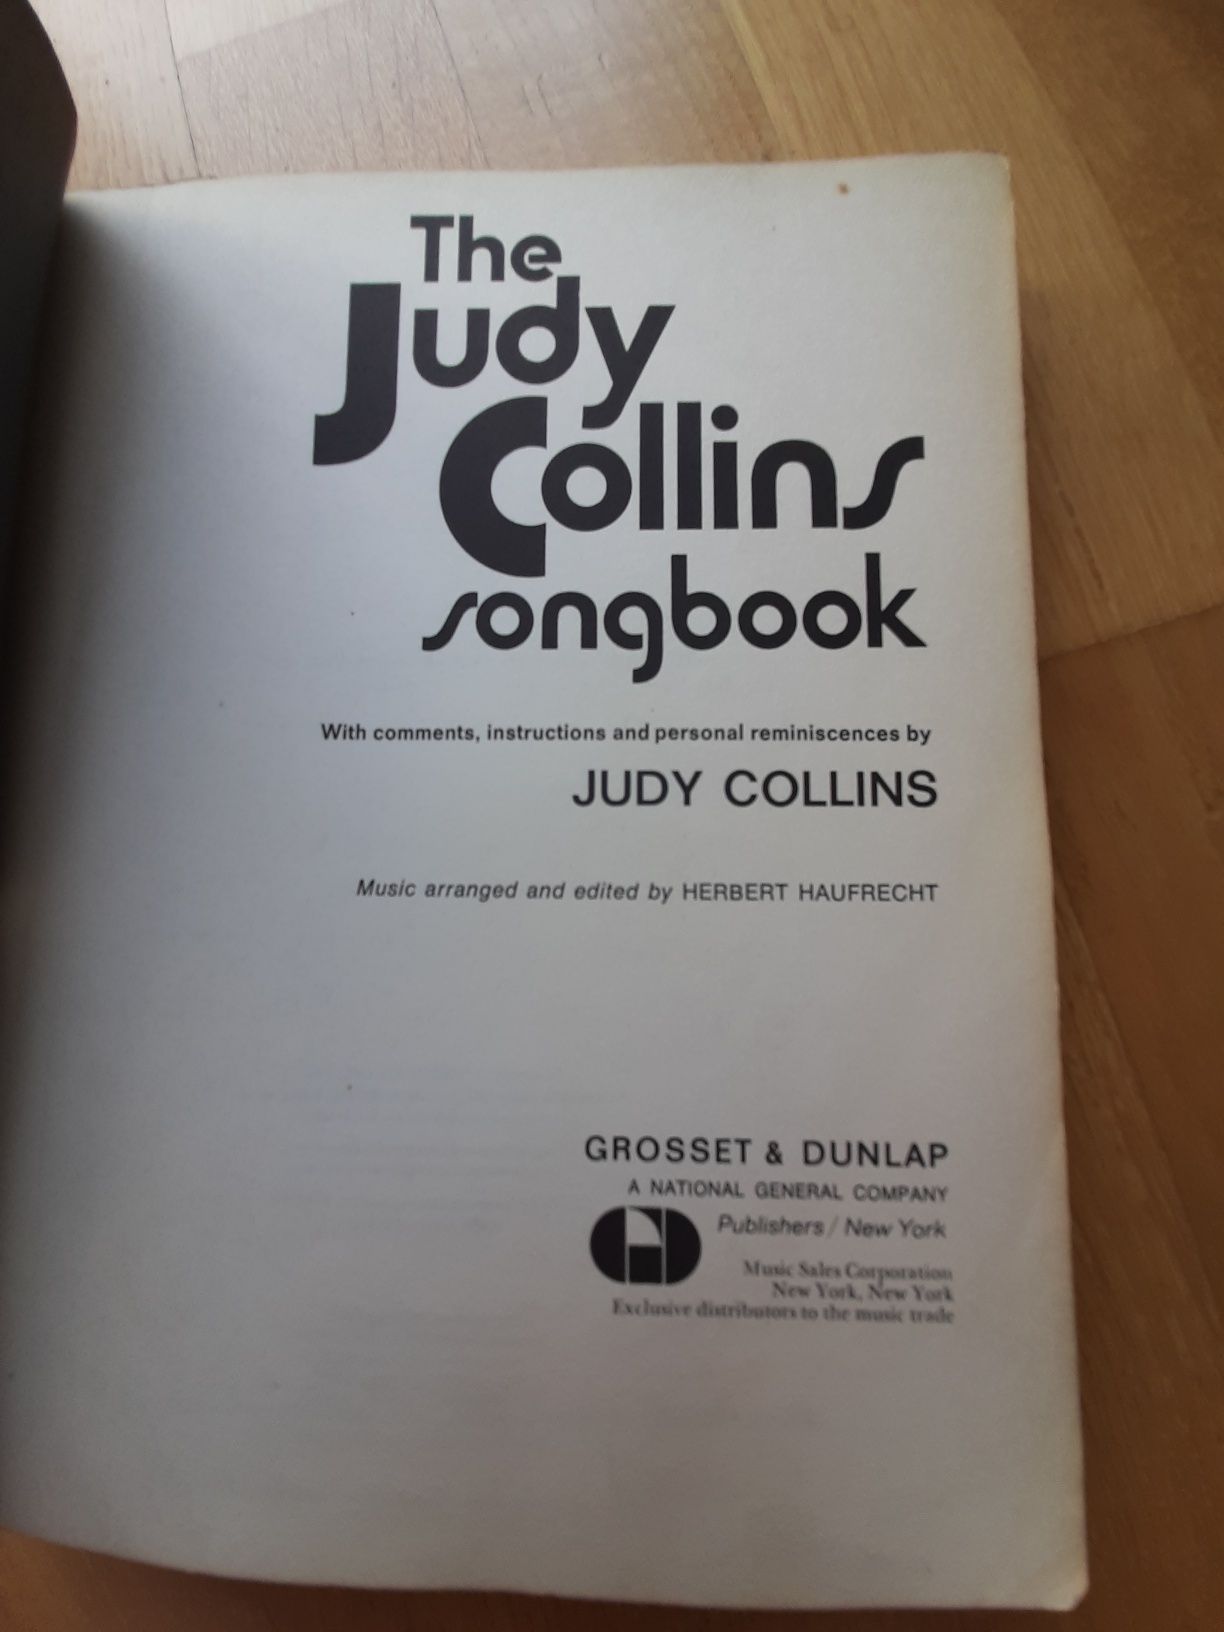 The Judy Collins songnook